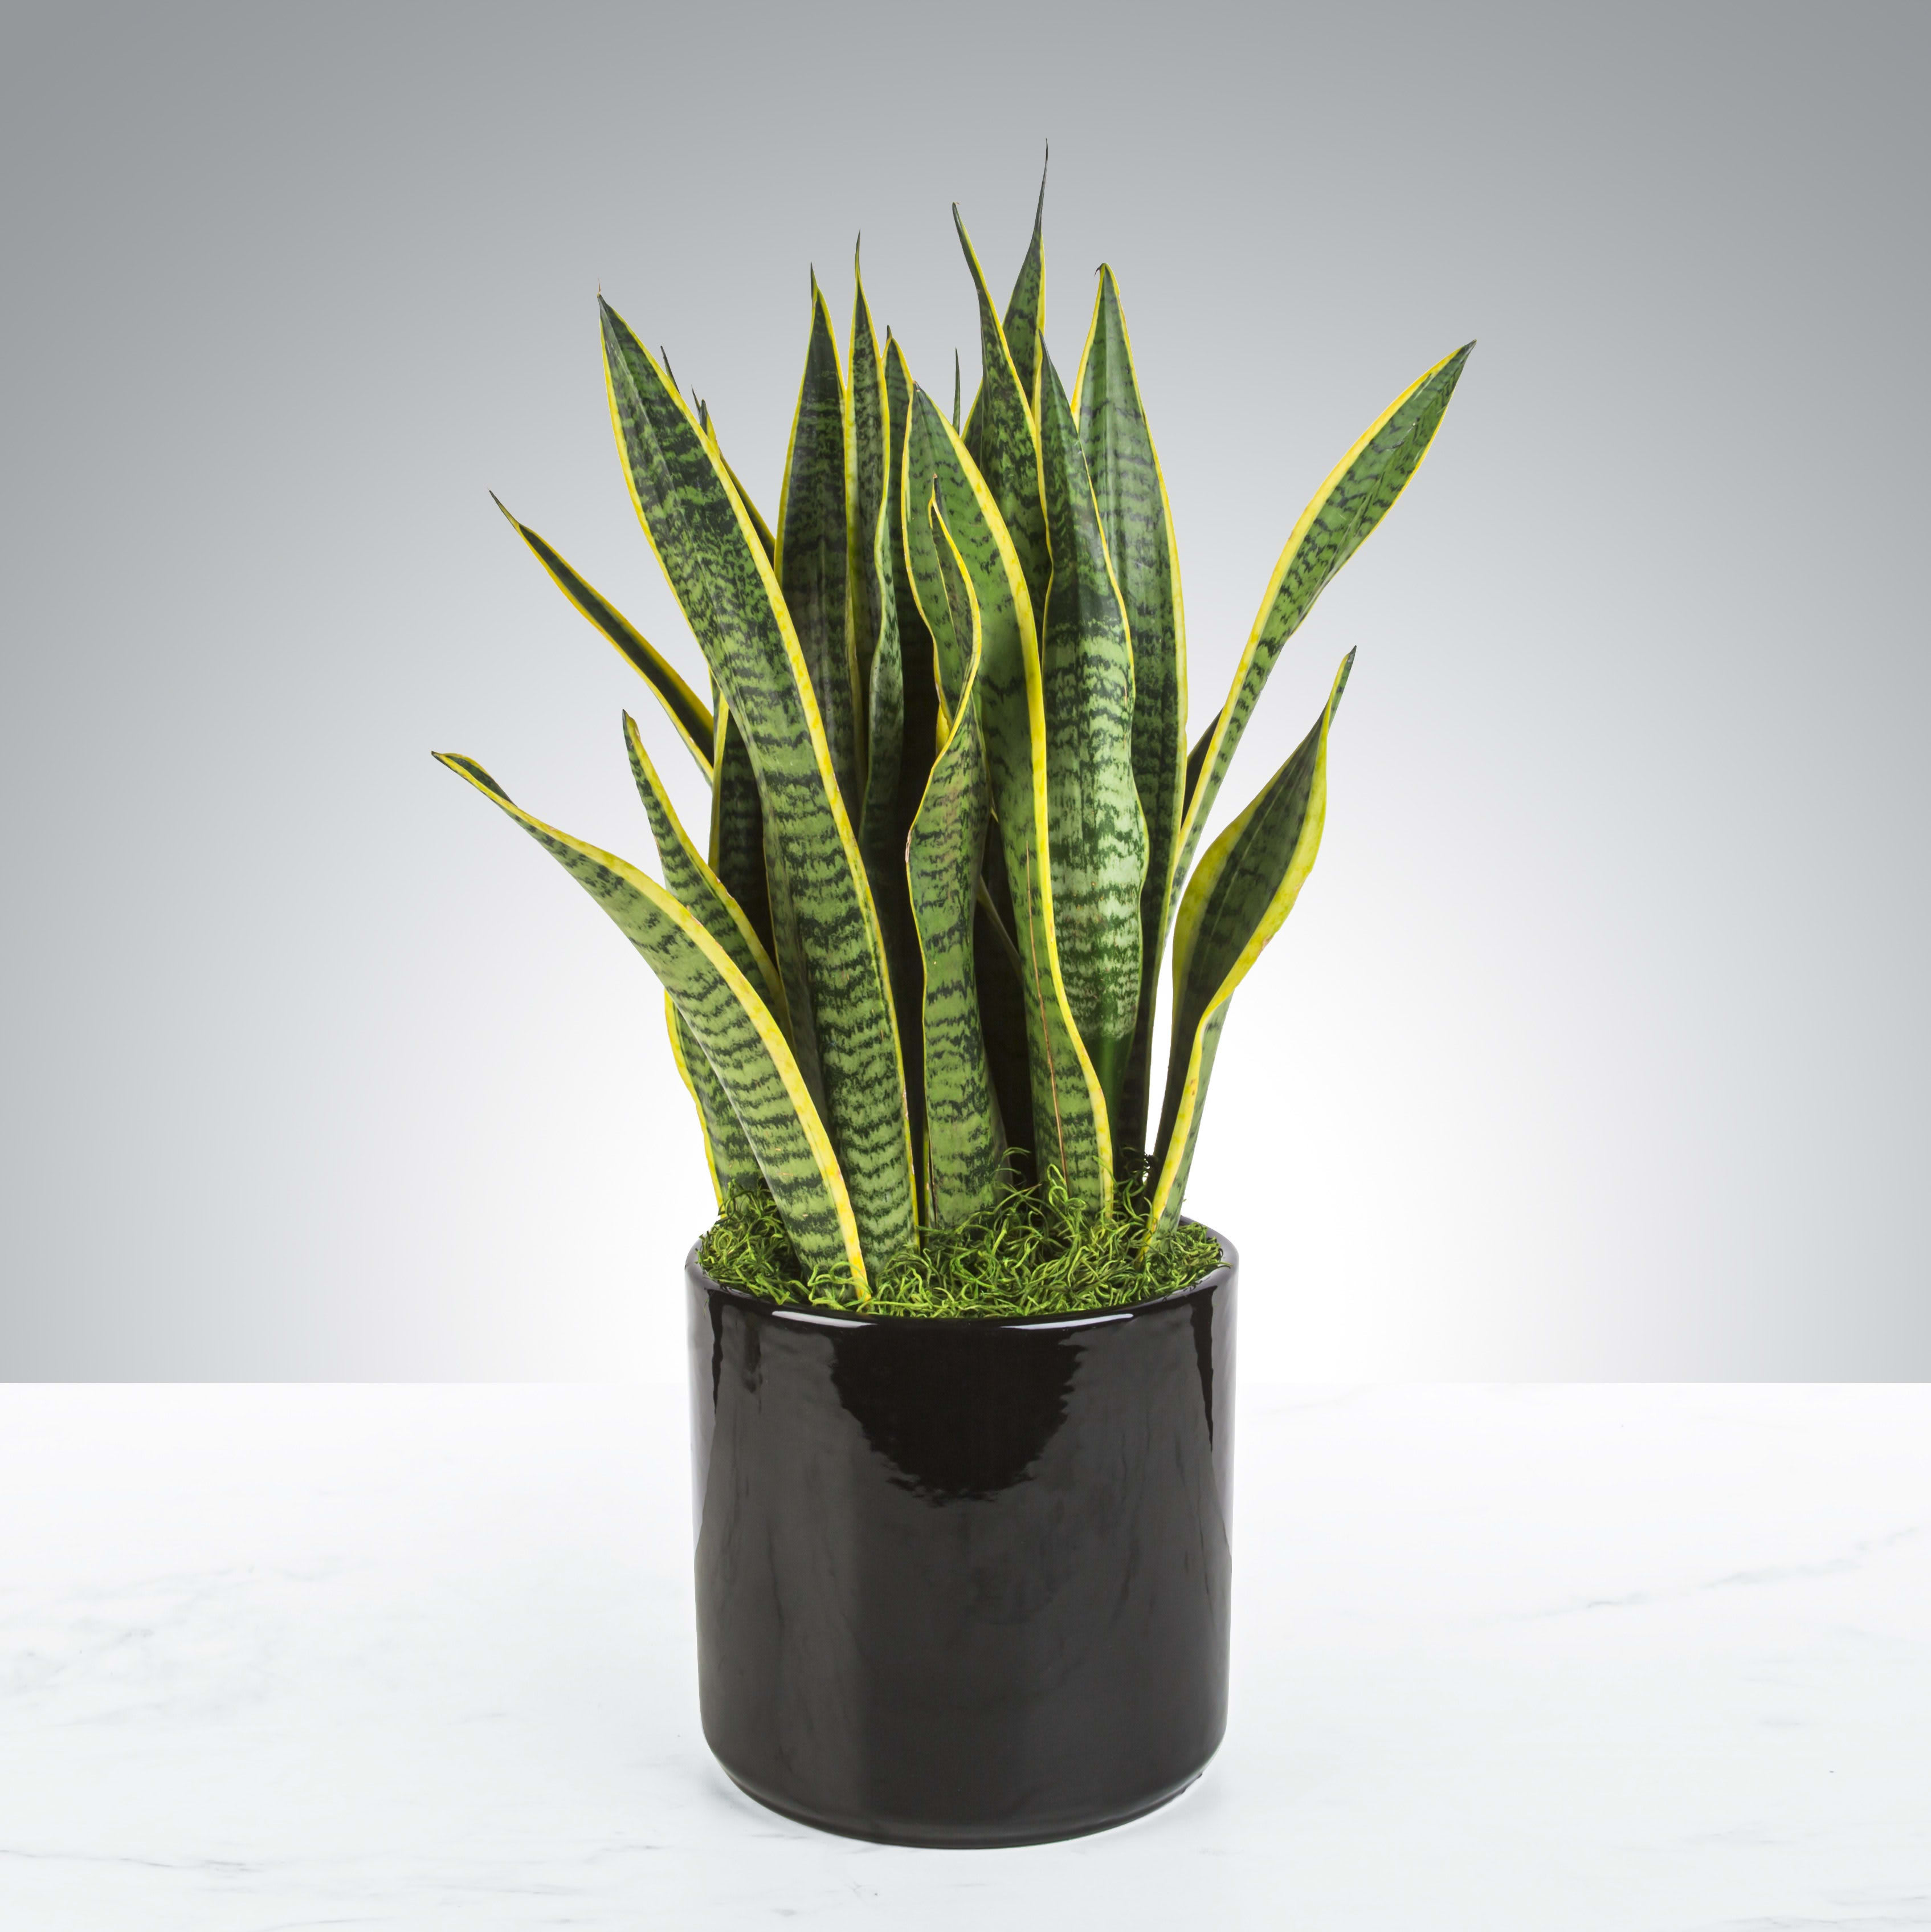 Snake Plant  - A large sized Snake Plant in a modern a basket. Snake Plants are said to improve air quality by removing toxins and are near impossible to kill! No green thumb necessary!   